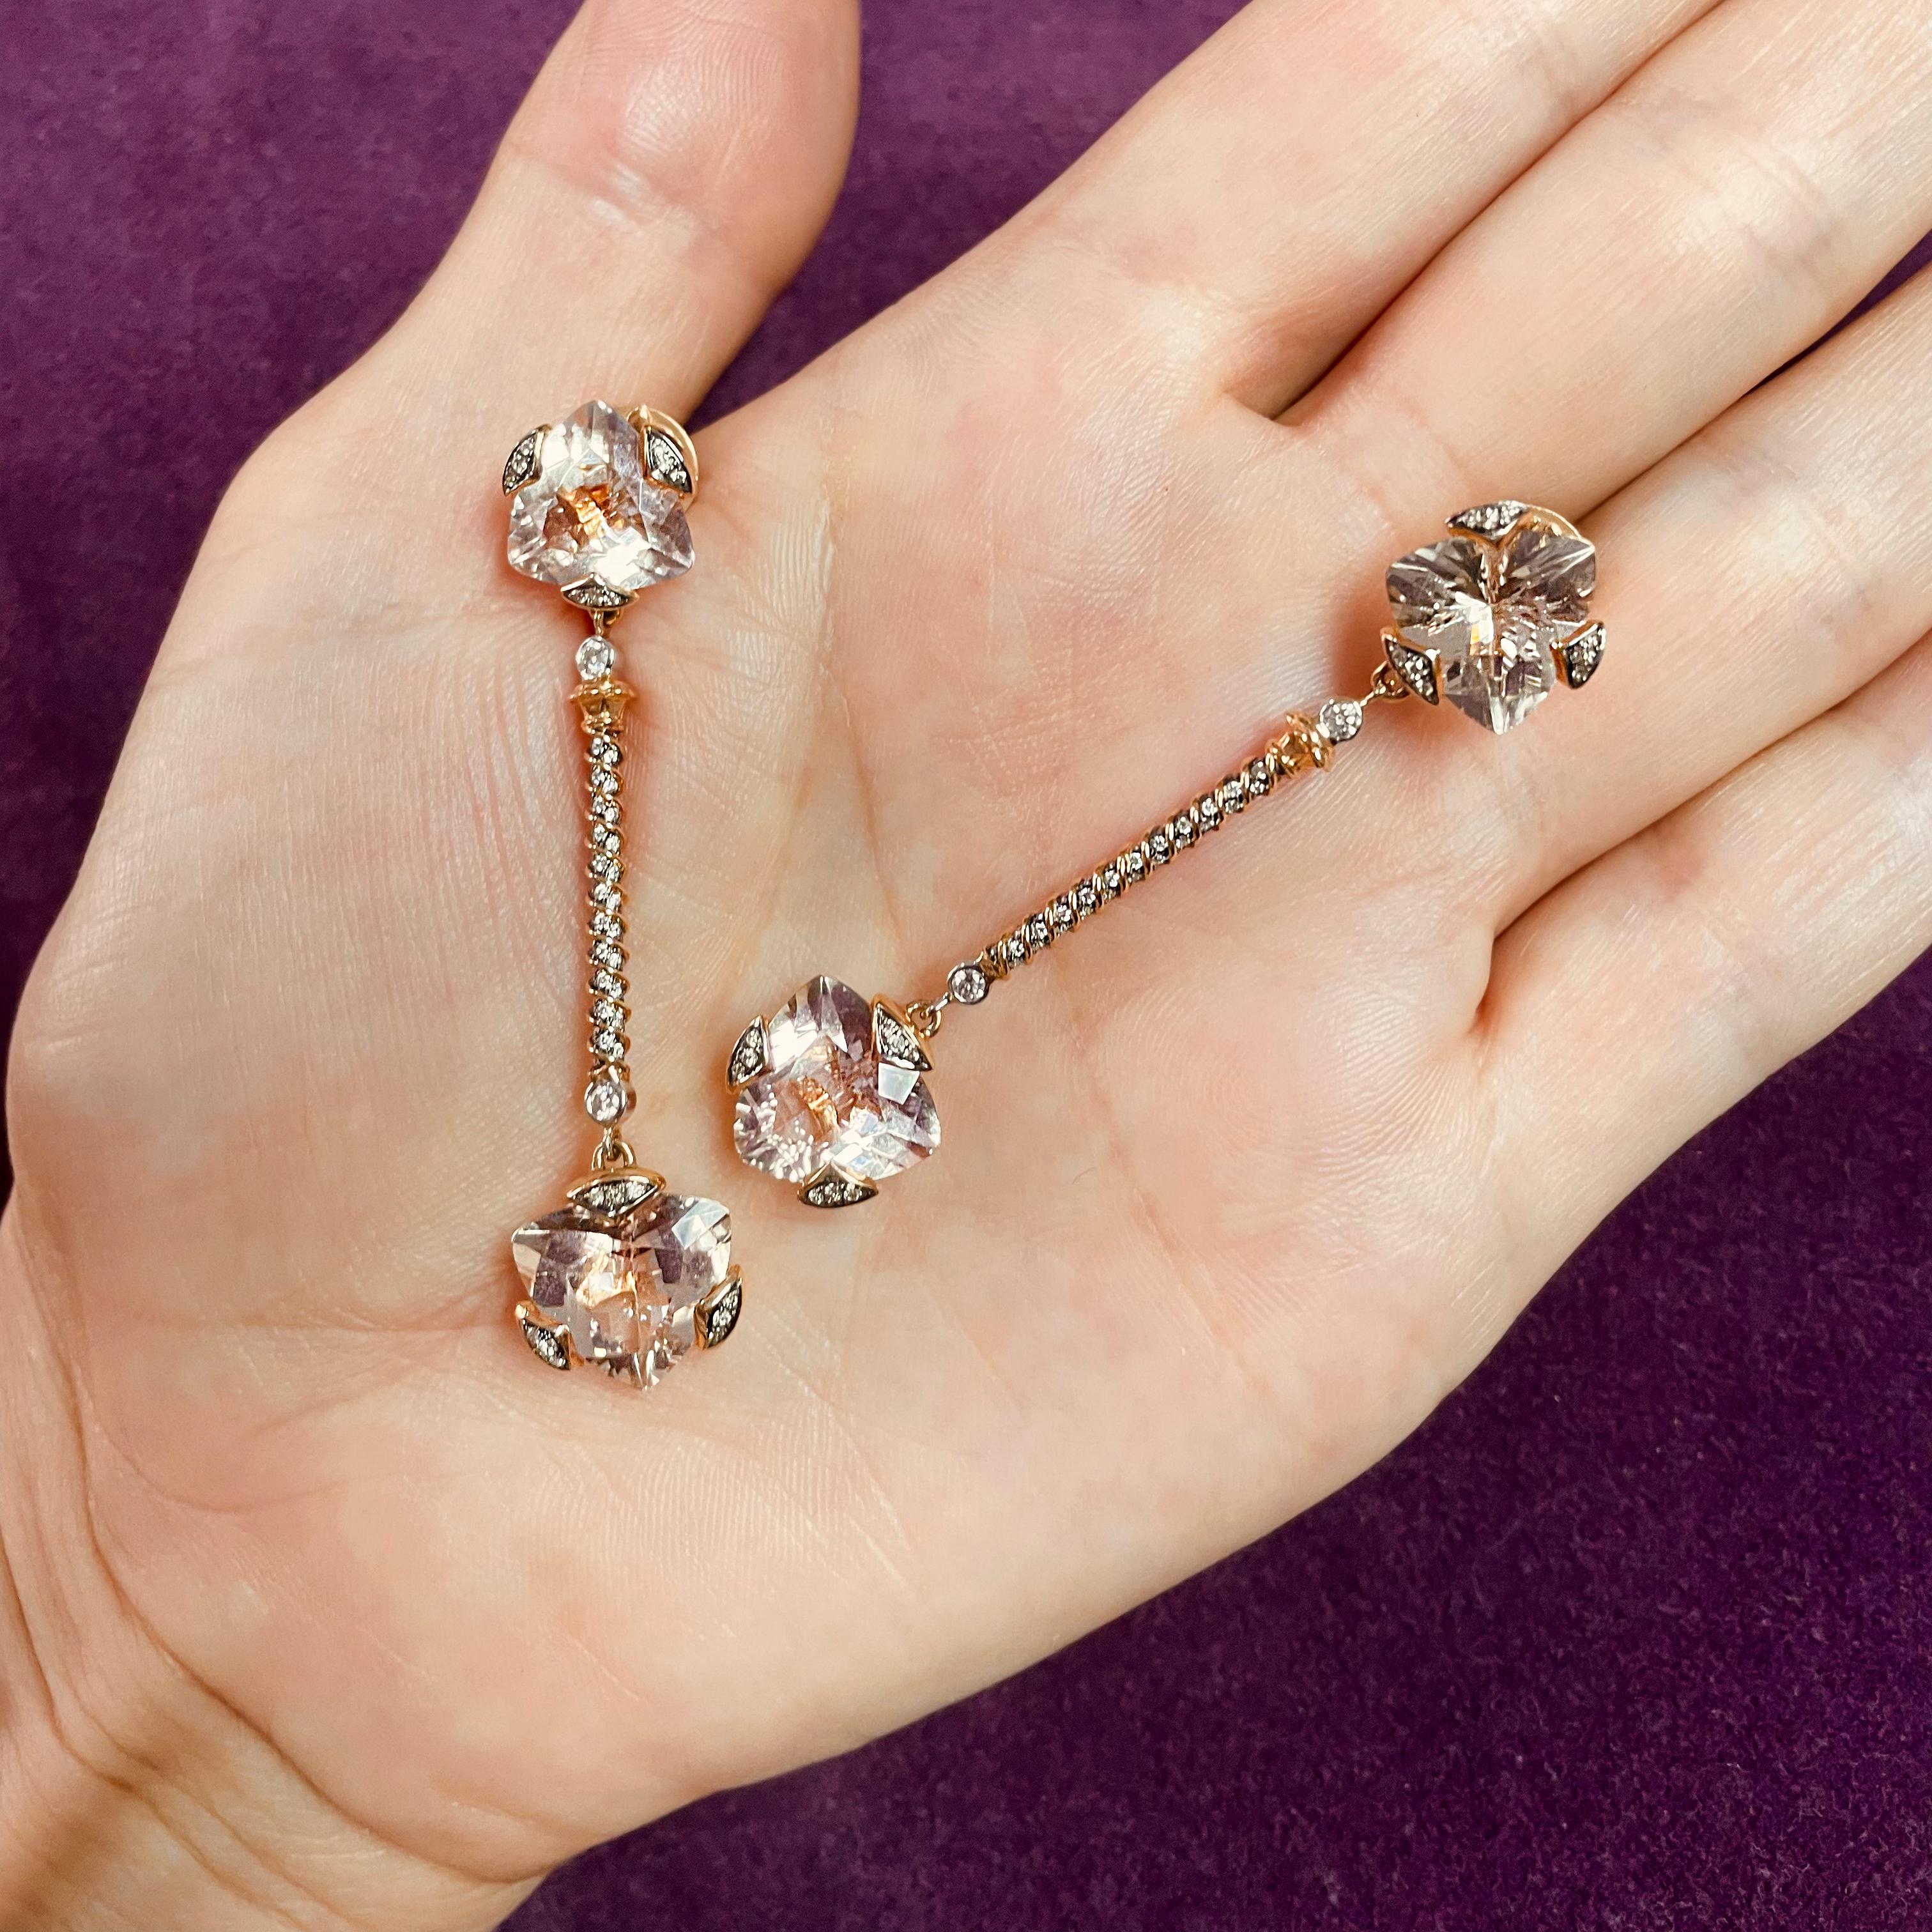 White and Brown Diamonds 0.47 cts, Morganite Trillions 4 pcs for 13.07 cts 
Inspired by the architecture of the Giotto's Bell Tower in Florence, from our 